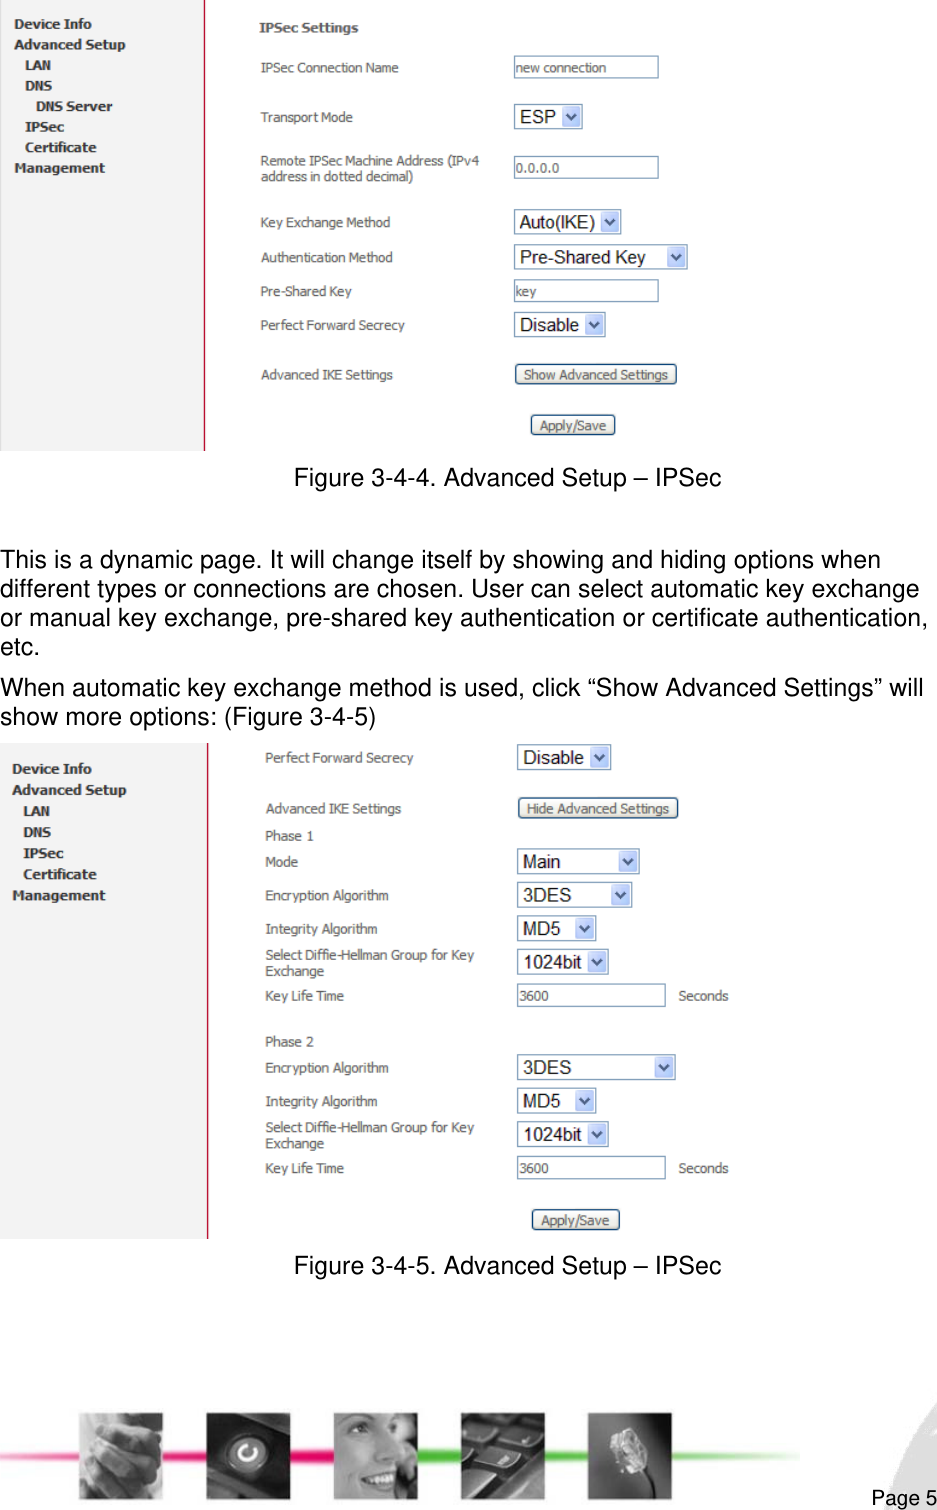                                                                                                                                                                                                        Figure 3-4-4. Advanced Setup – IPSec  This is a dynamic page. It will change itself by showing and hiding options when different types or connections are chosen. User can select automatic key exchange or manual key exchange, pre-shared key authentication or certificate authentication, etc. When automatic key exchange method is used, click “Show Advanced Settings” will show more options: (Figure 3-4-5)  Figure 3-4-5. Advanced Setup – IPSec    Page 5 